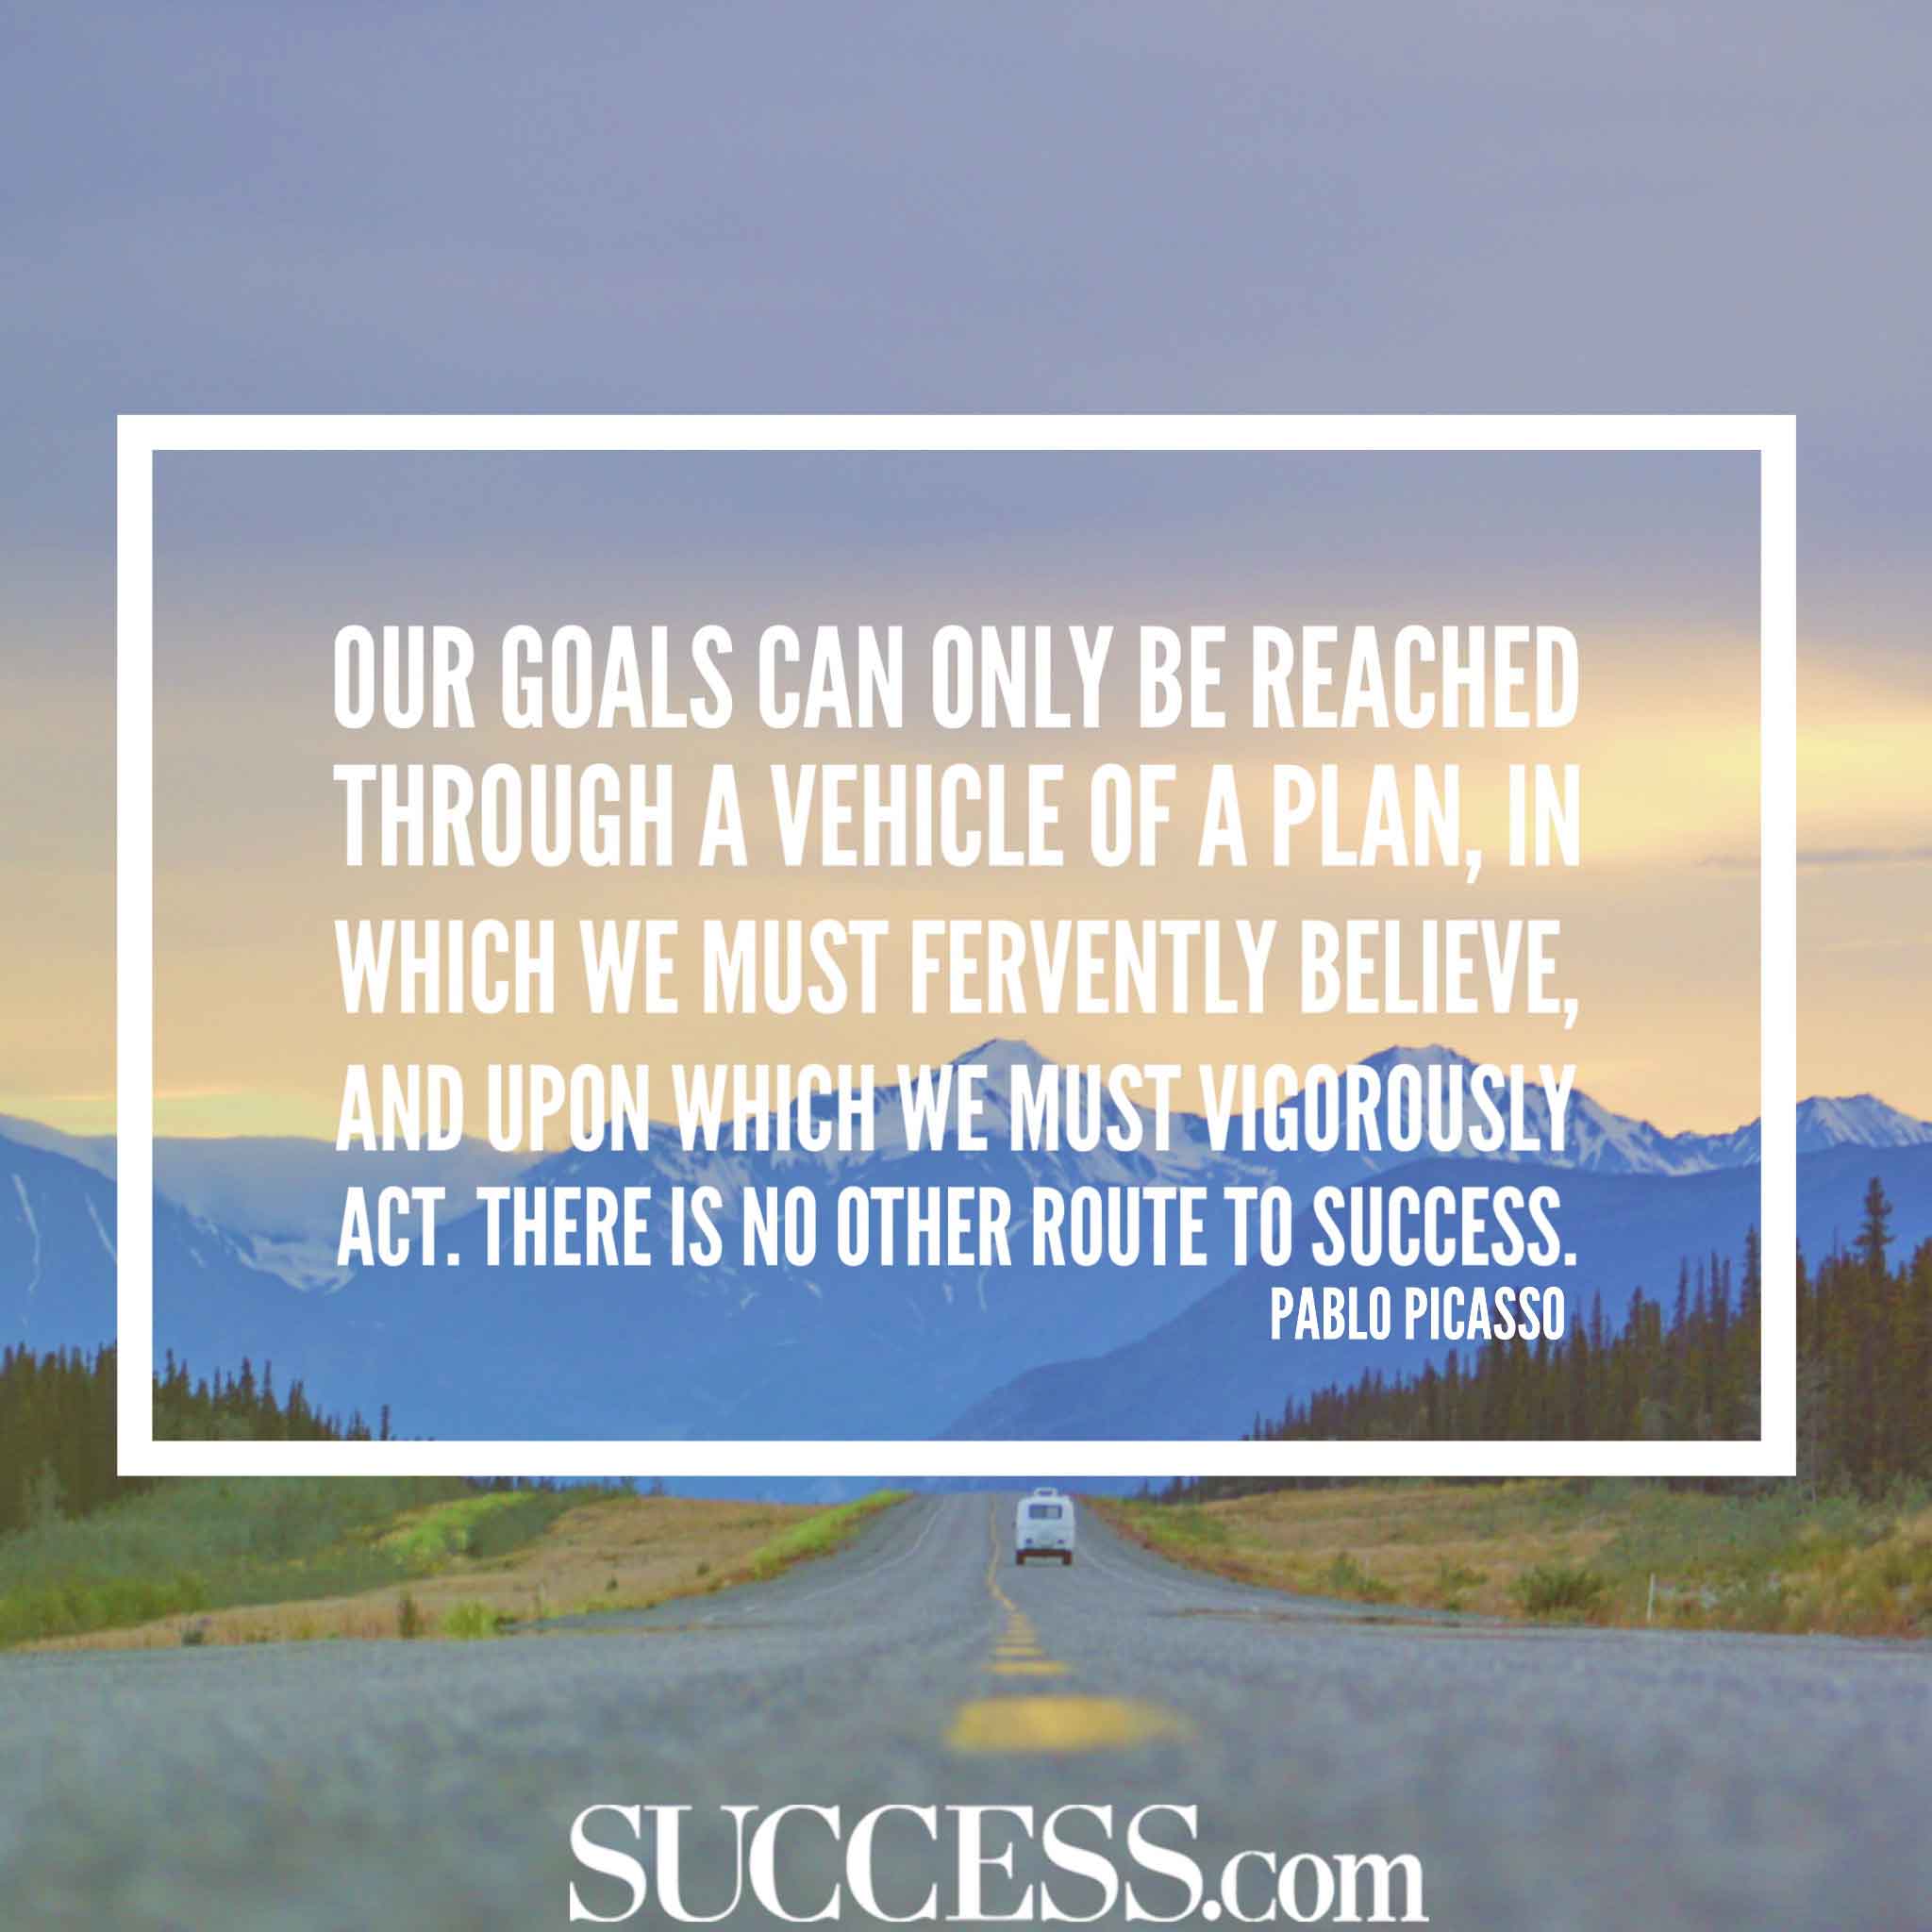 Goal Setting Quotes